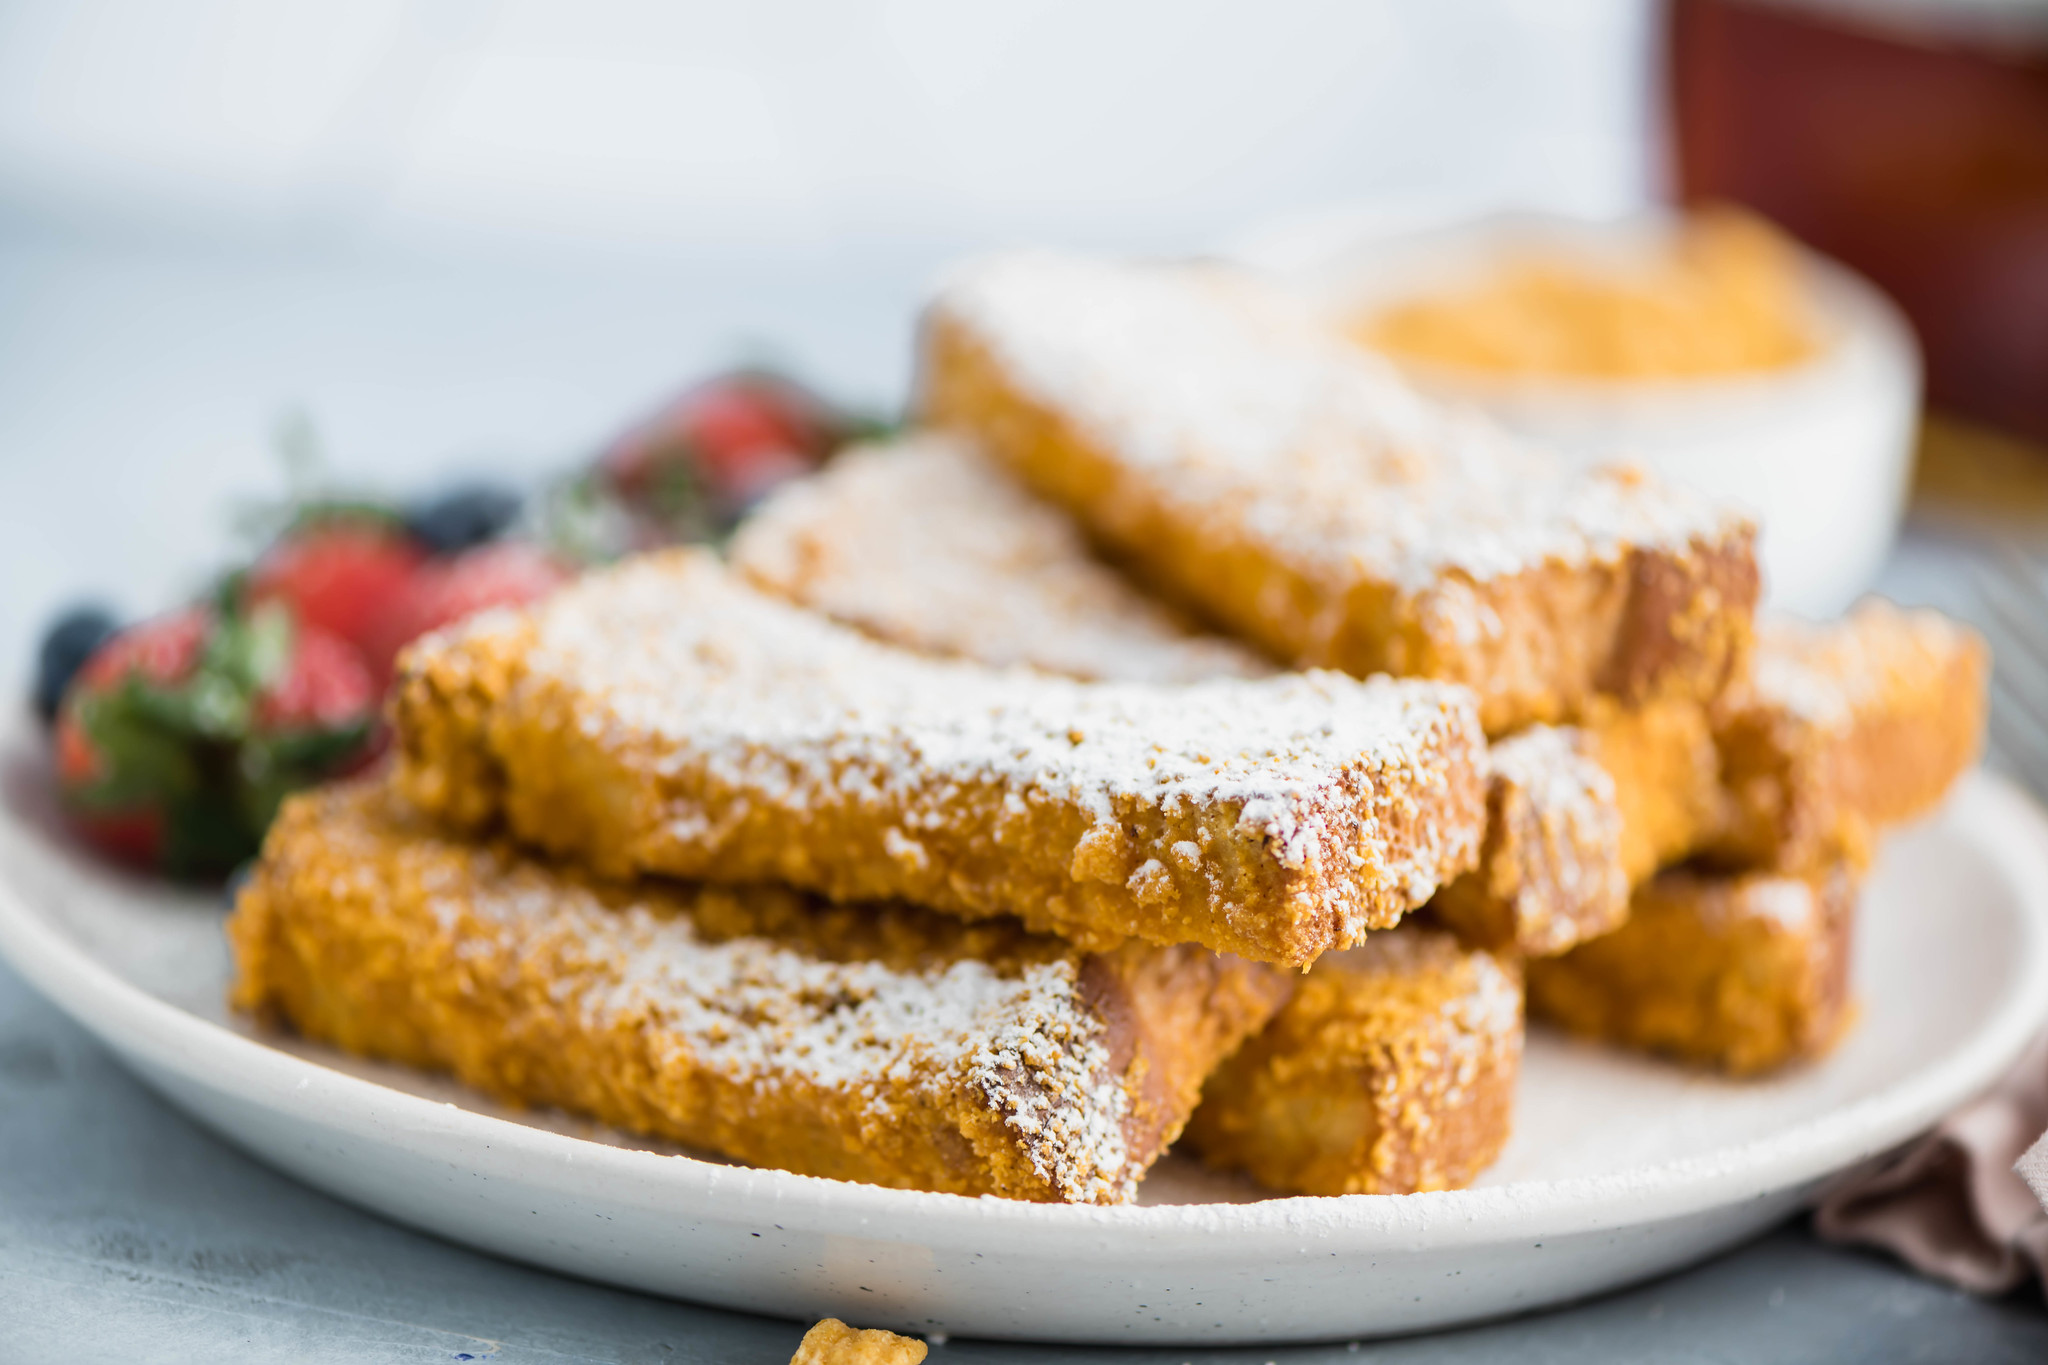 These Crunchy French Toast Sticks are sure to become a family favorite. Thick cut bread cut into sticks and coated in your favorite cereal crumbs.